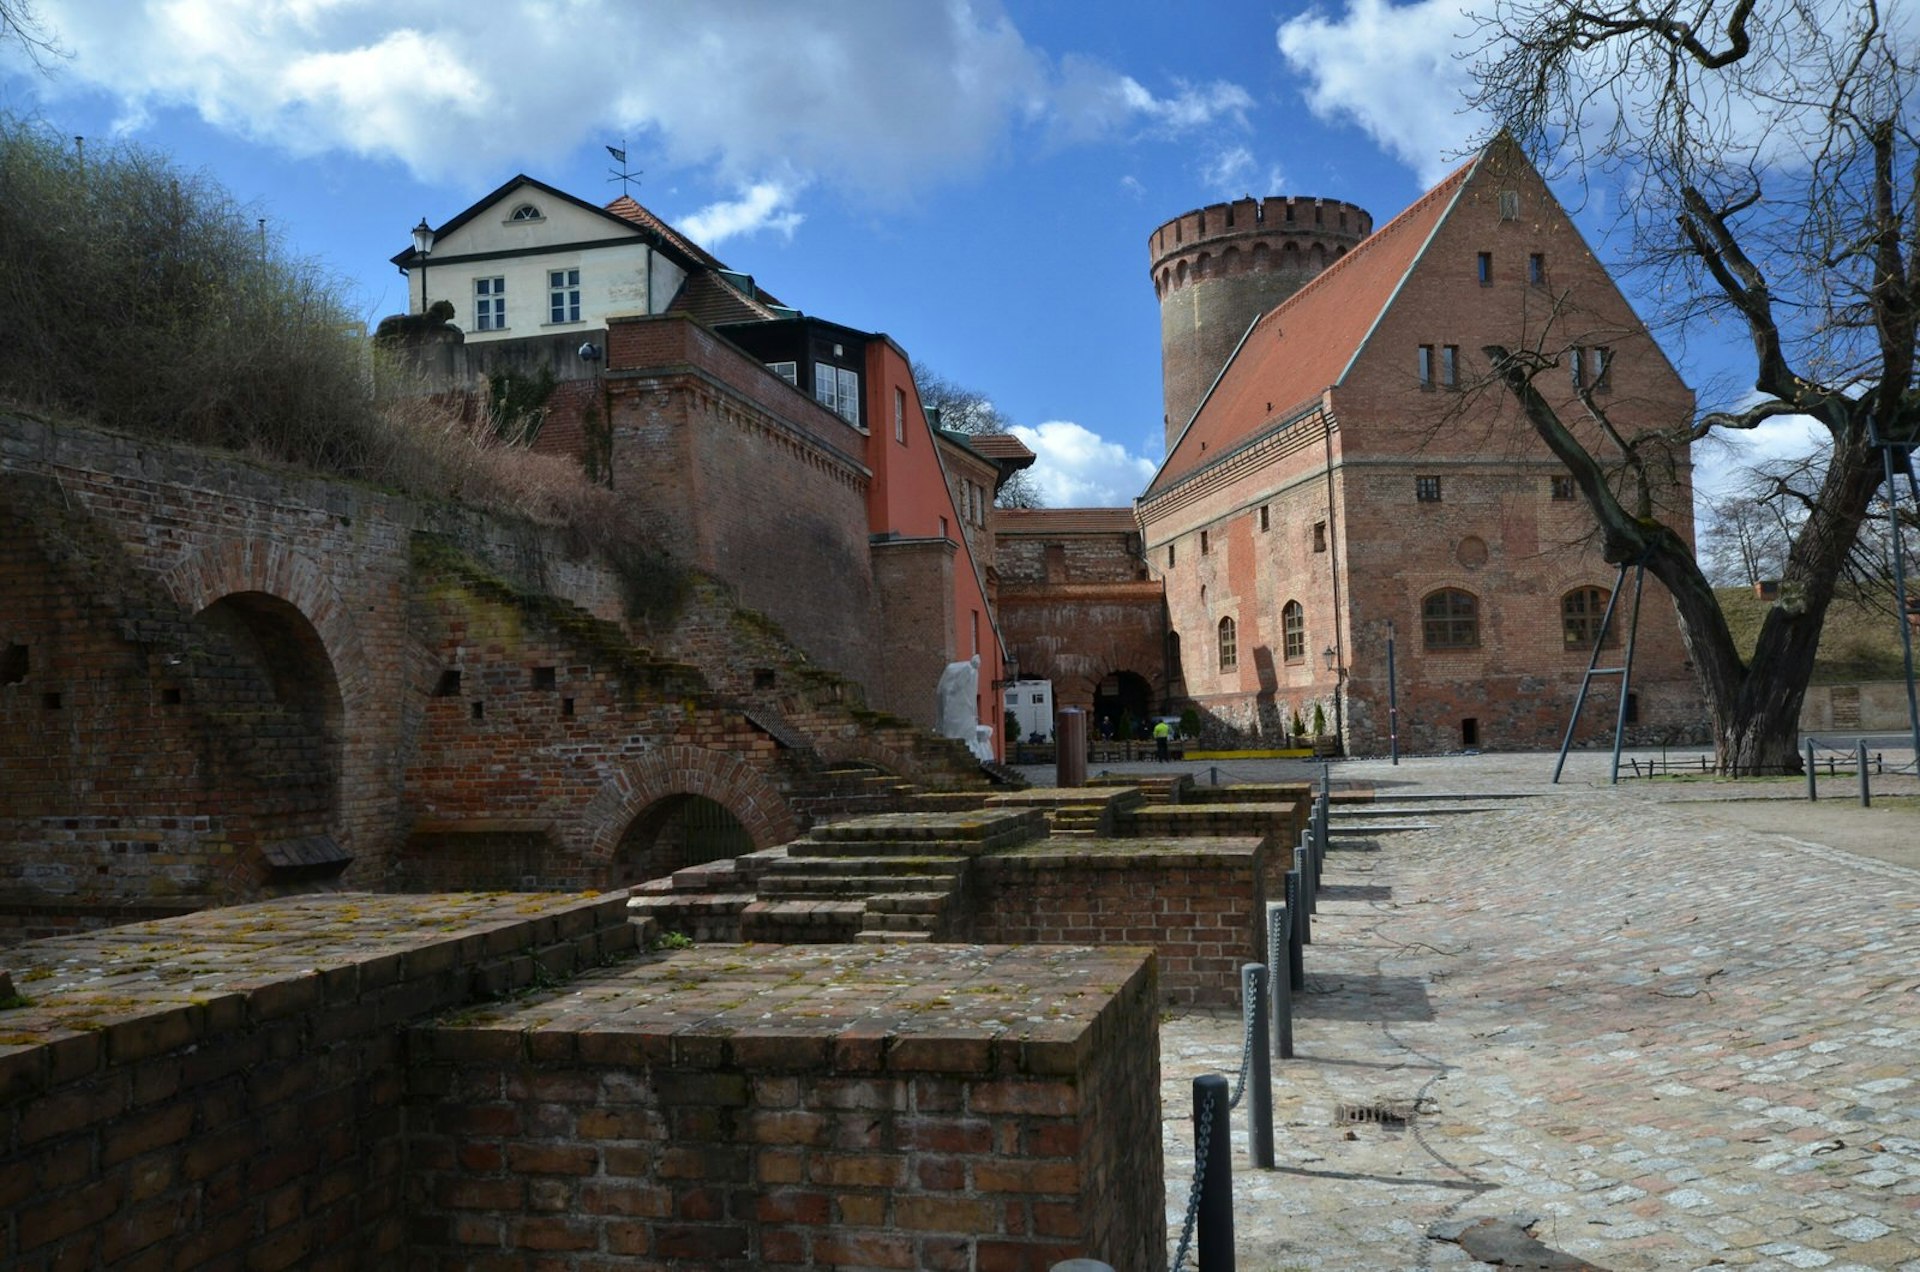 Berlin day trips - an image from inside the Spandau Citadel. The Renaissance military fortress has a cobbled courtyard and red-brick buildings